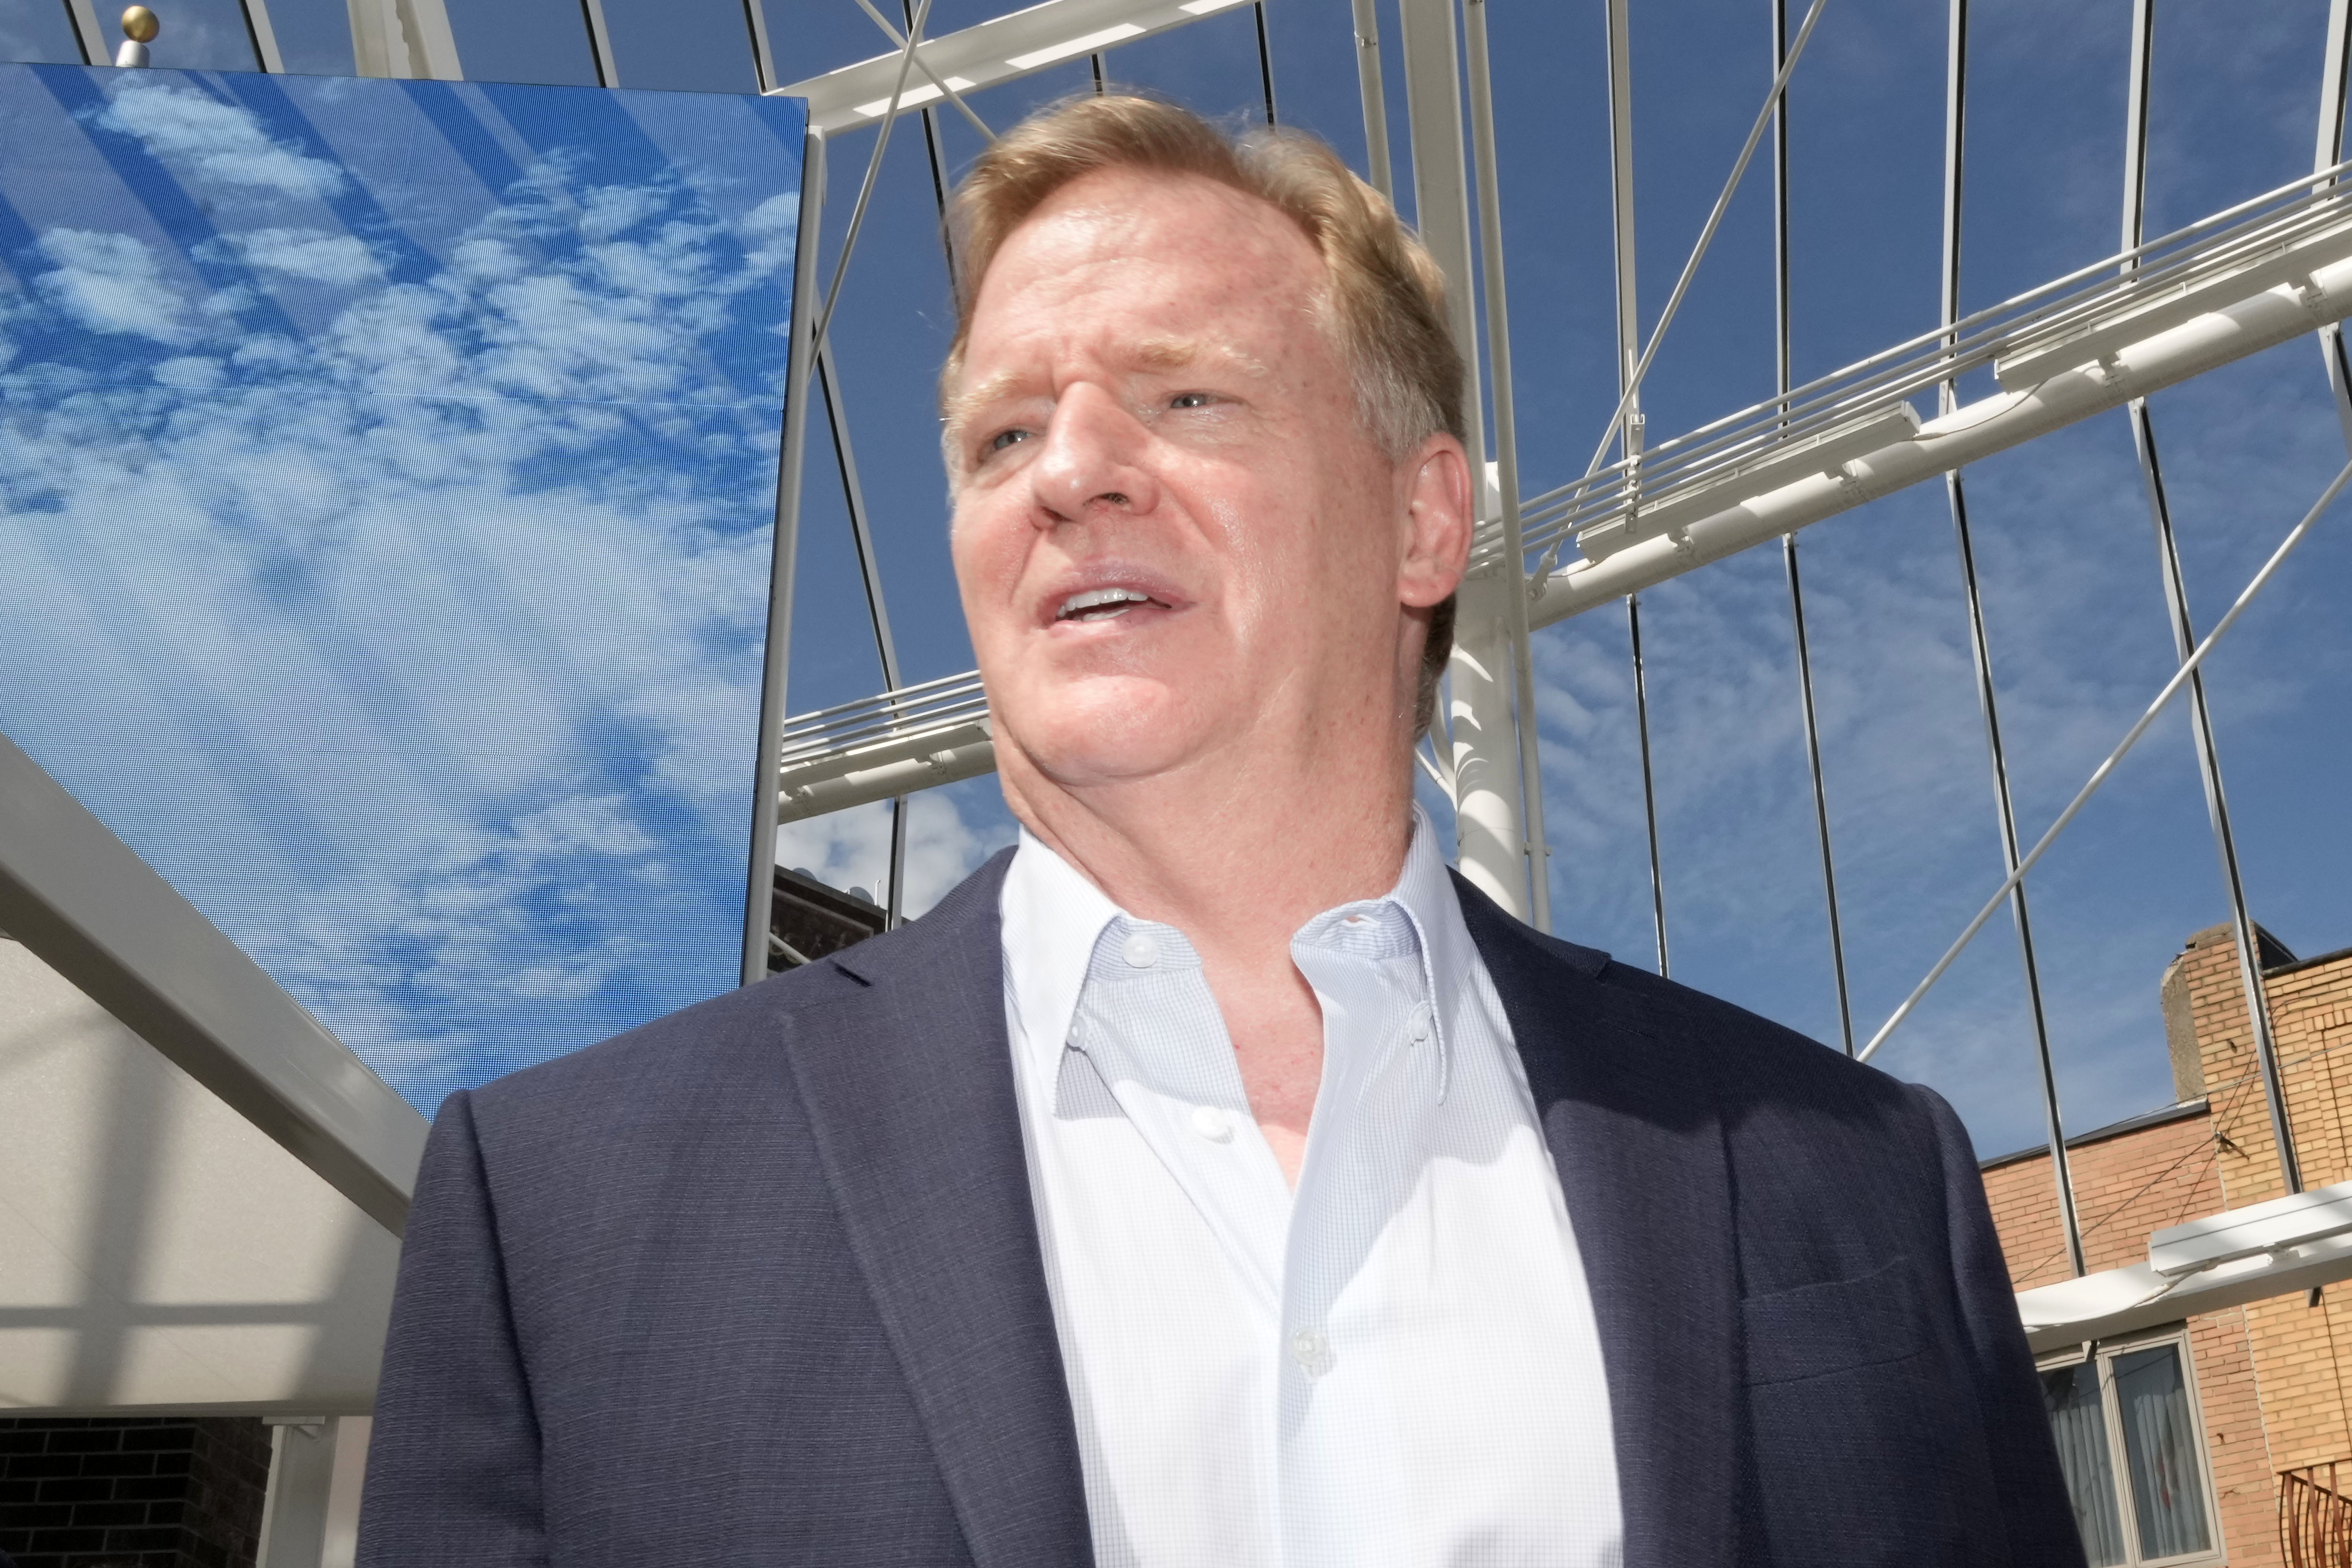 Goodell is not NFL’s Judge and Jury … That’s a Good Thing